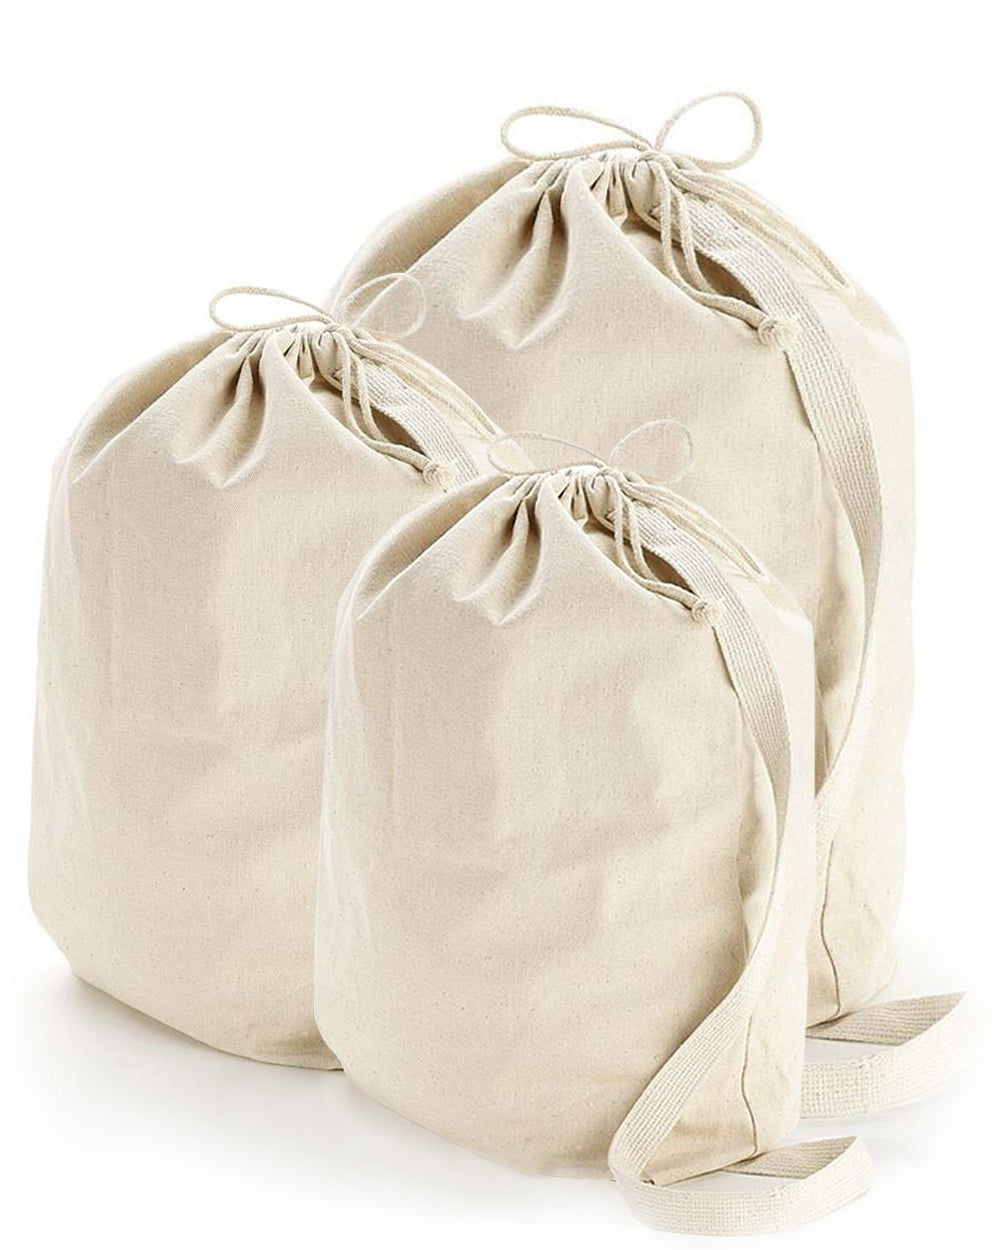 12 pc Heavy Canvas Laundry Bags W/Shoulder Strap (Small-Med-Large) - By Dozen